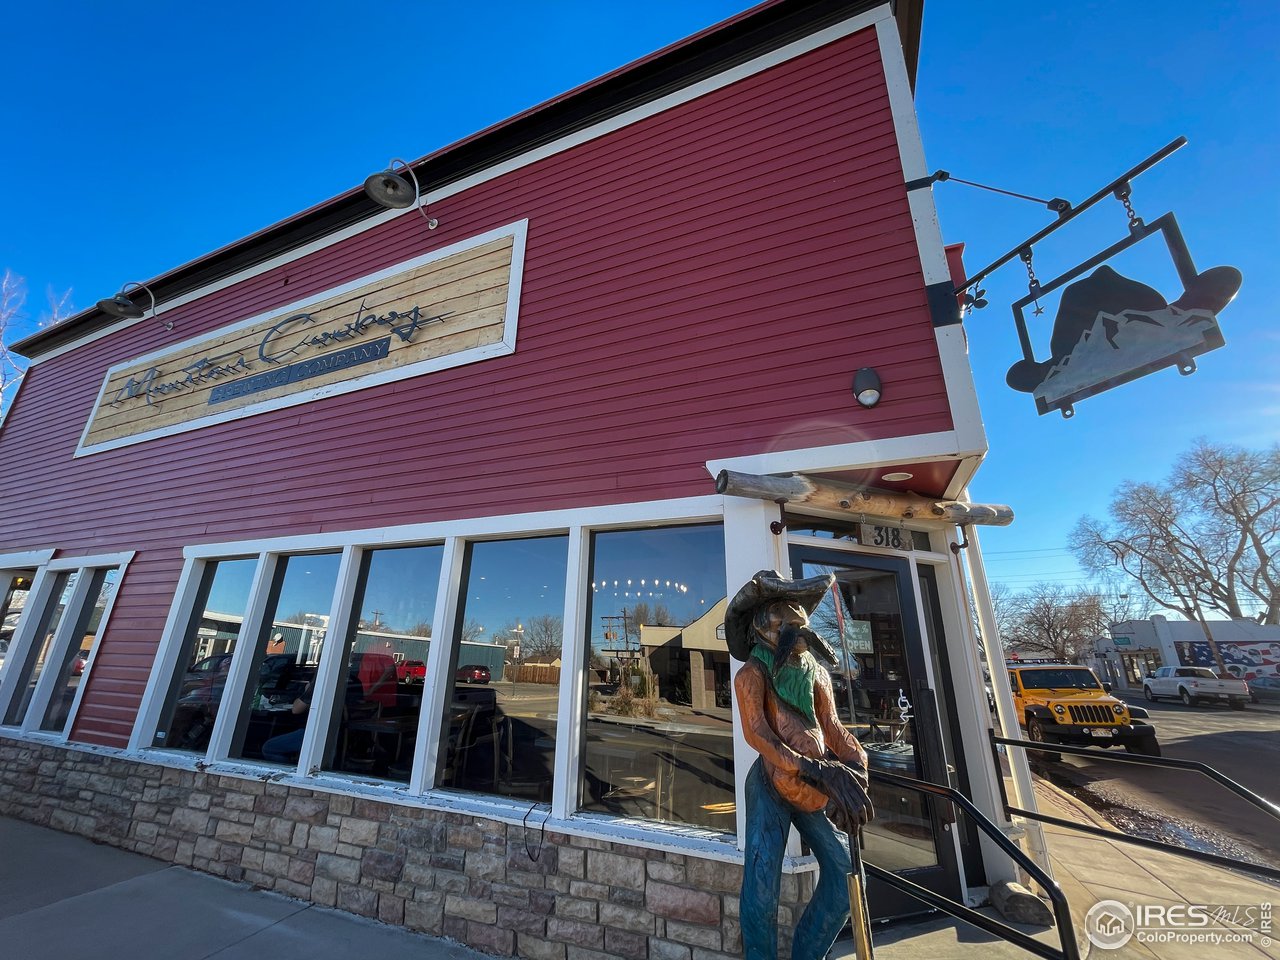 A local business just steps to the East of 234 5th St is Mountain Cowboy Brewing Company.